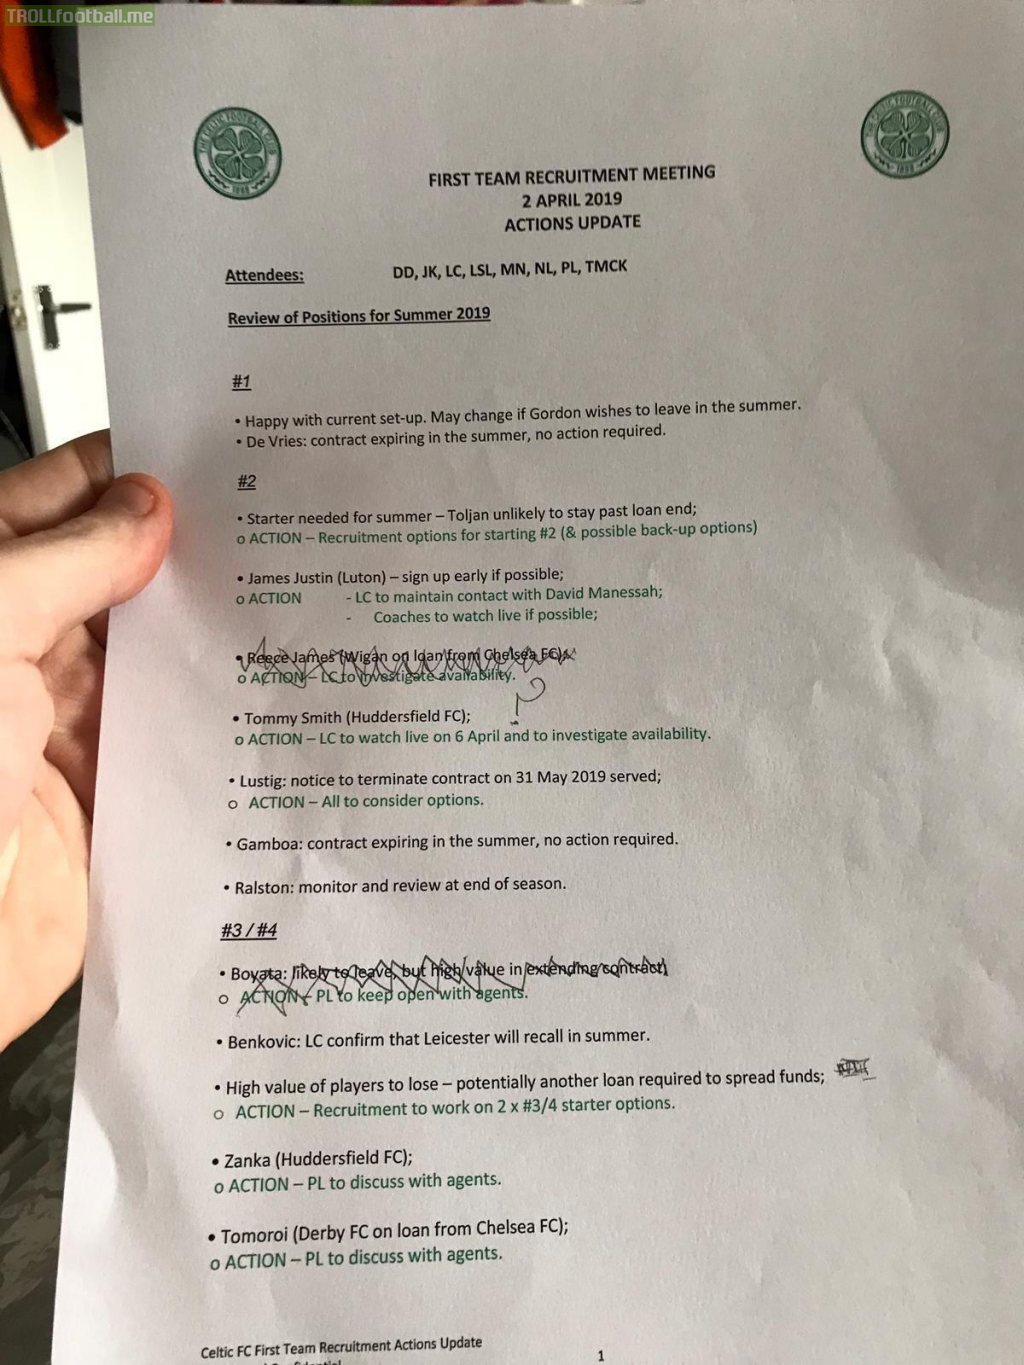 Celtic recruitment document has been leaked. James Justin is their top priority.